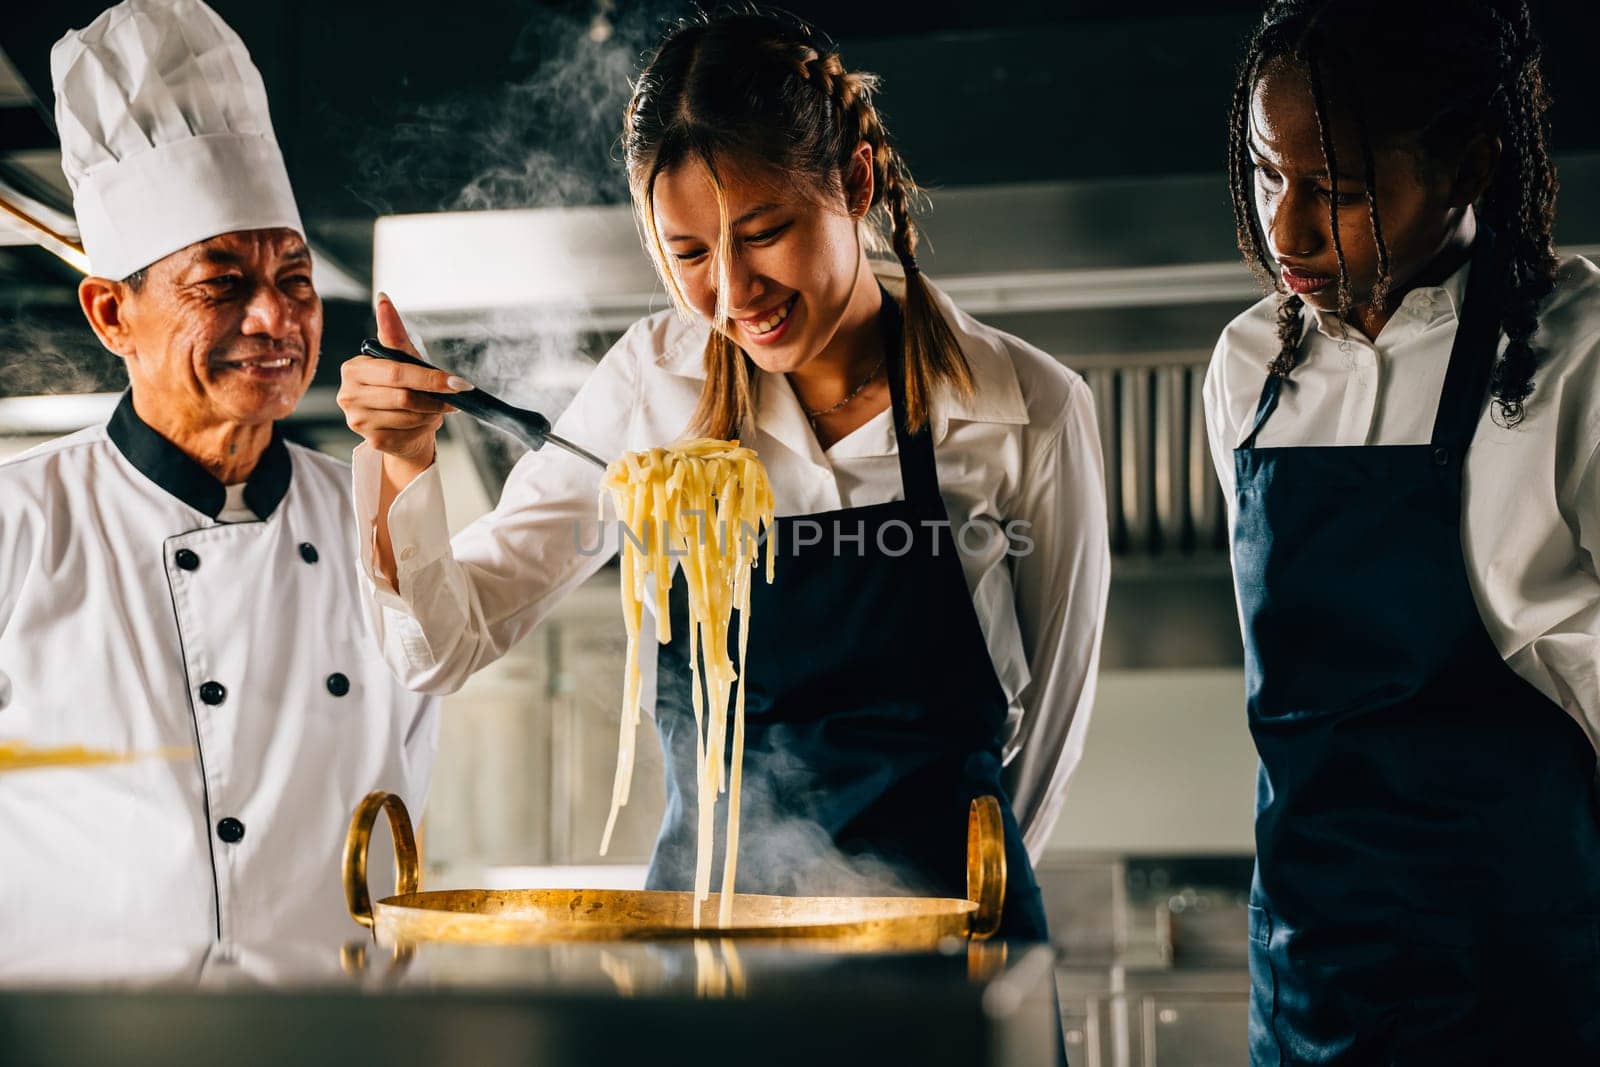 Chef educates in kitchen. Schoolgirls make Japanese noodle. Kids and teacher at stove. Smiling portrait of learning is modern education. Making dinner with ladle gives joy. Foor Education Concept